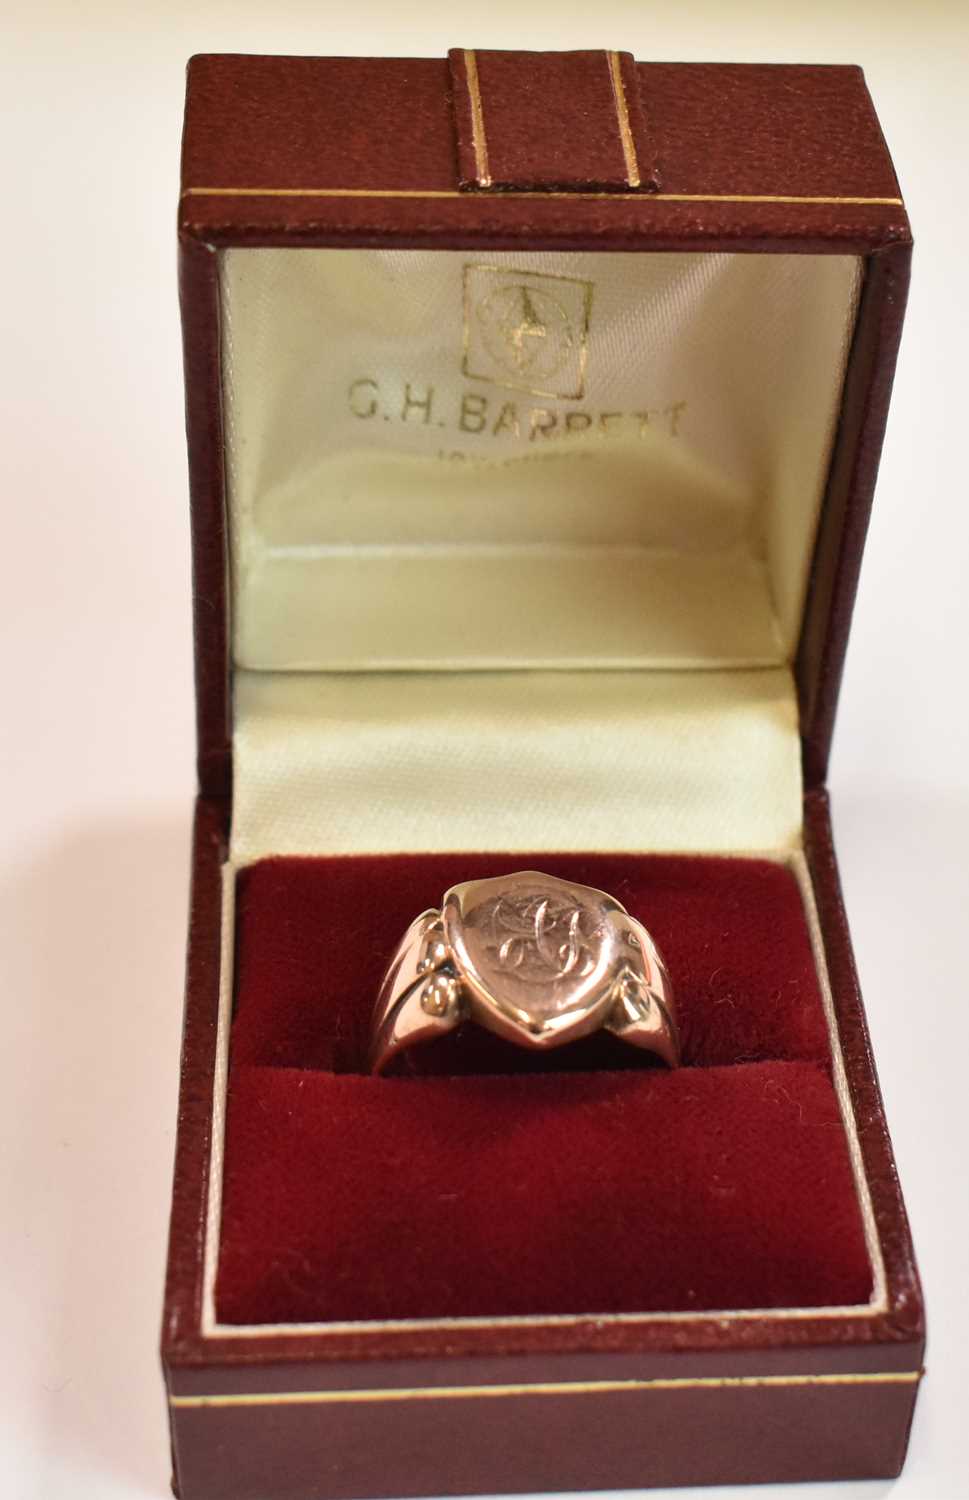 An Edwardian 9ct gold signet ring with engraved initials to the shield shaped platform, Chester - Image 2 of 3